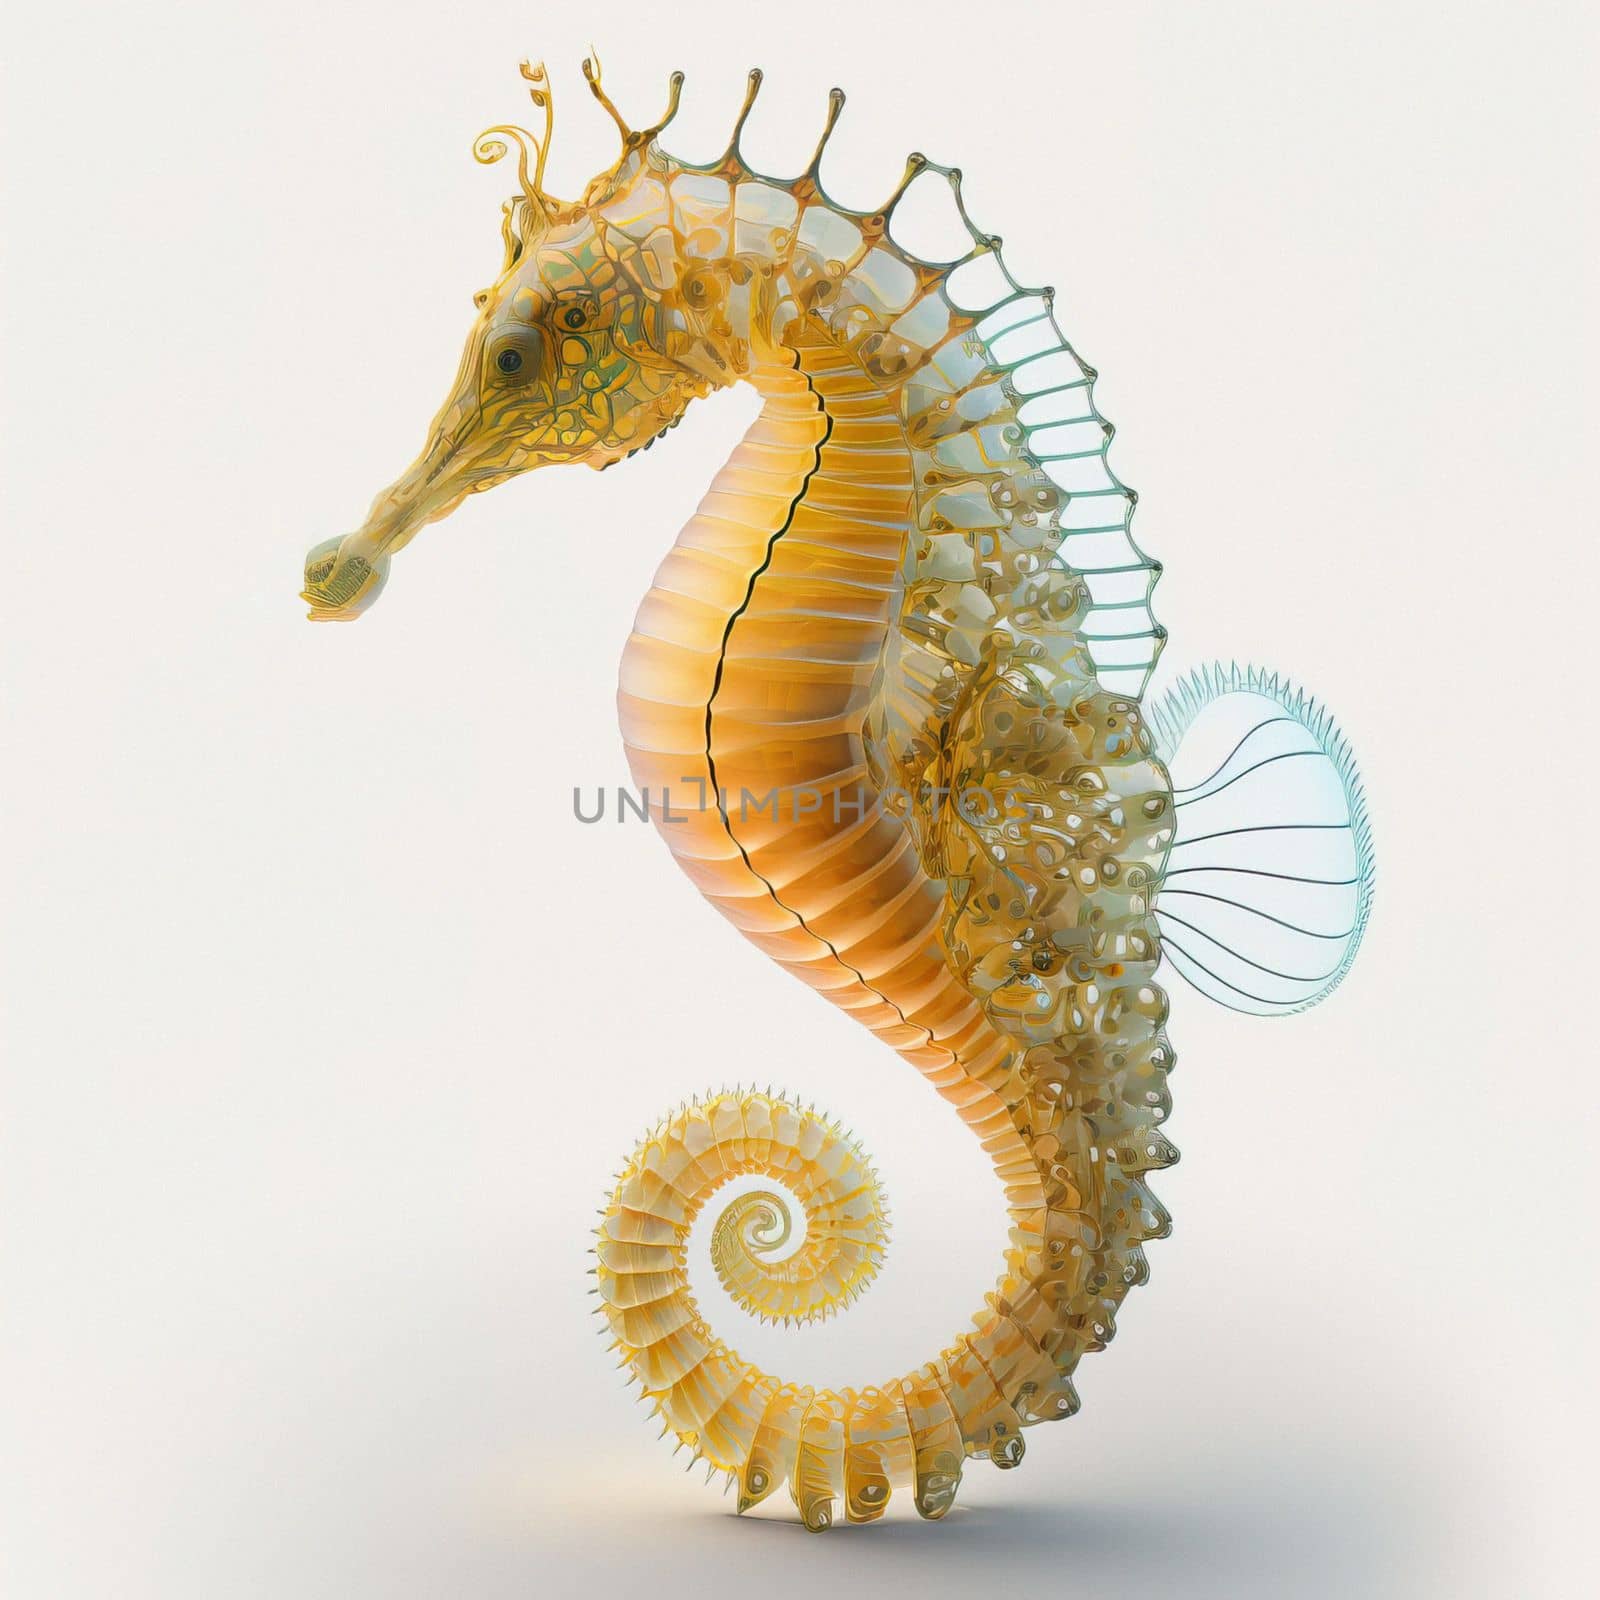 3D illustration of seahorse with gold color tones, realistic texture, isolated, rendered object. Download image